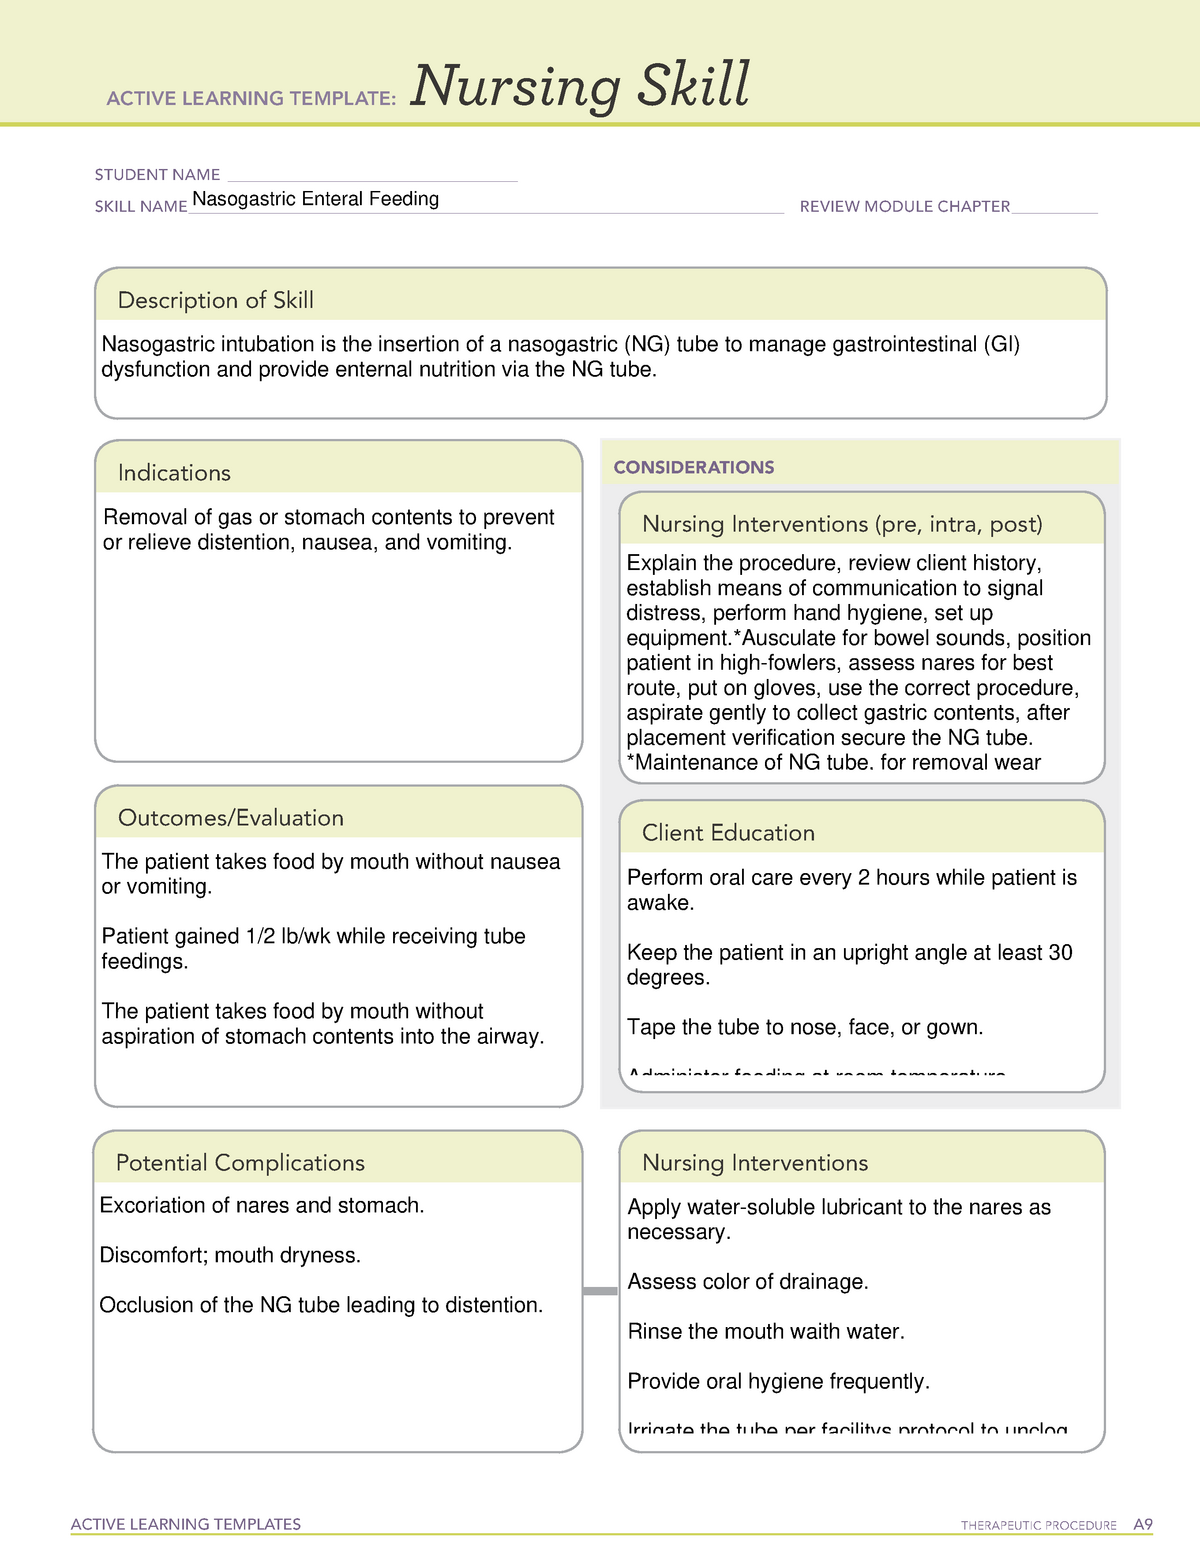 NasoGastric Tube CS Cms template for peds - ACTIVE LEARNING TEMPLATES ...